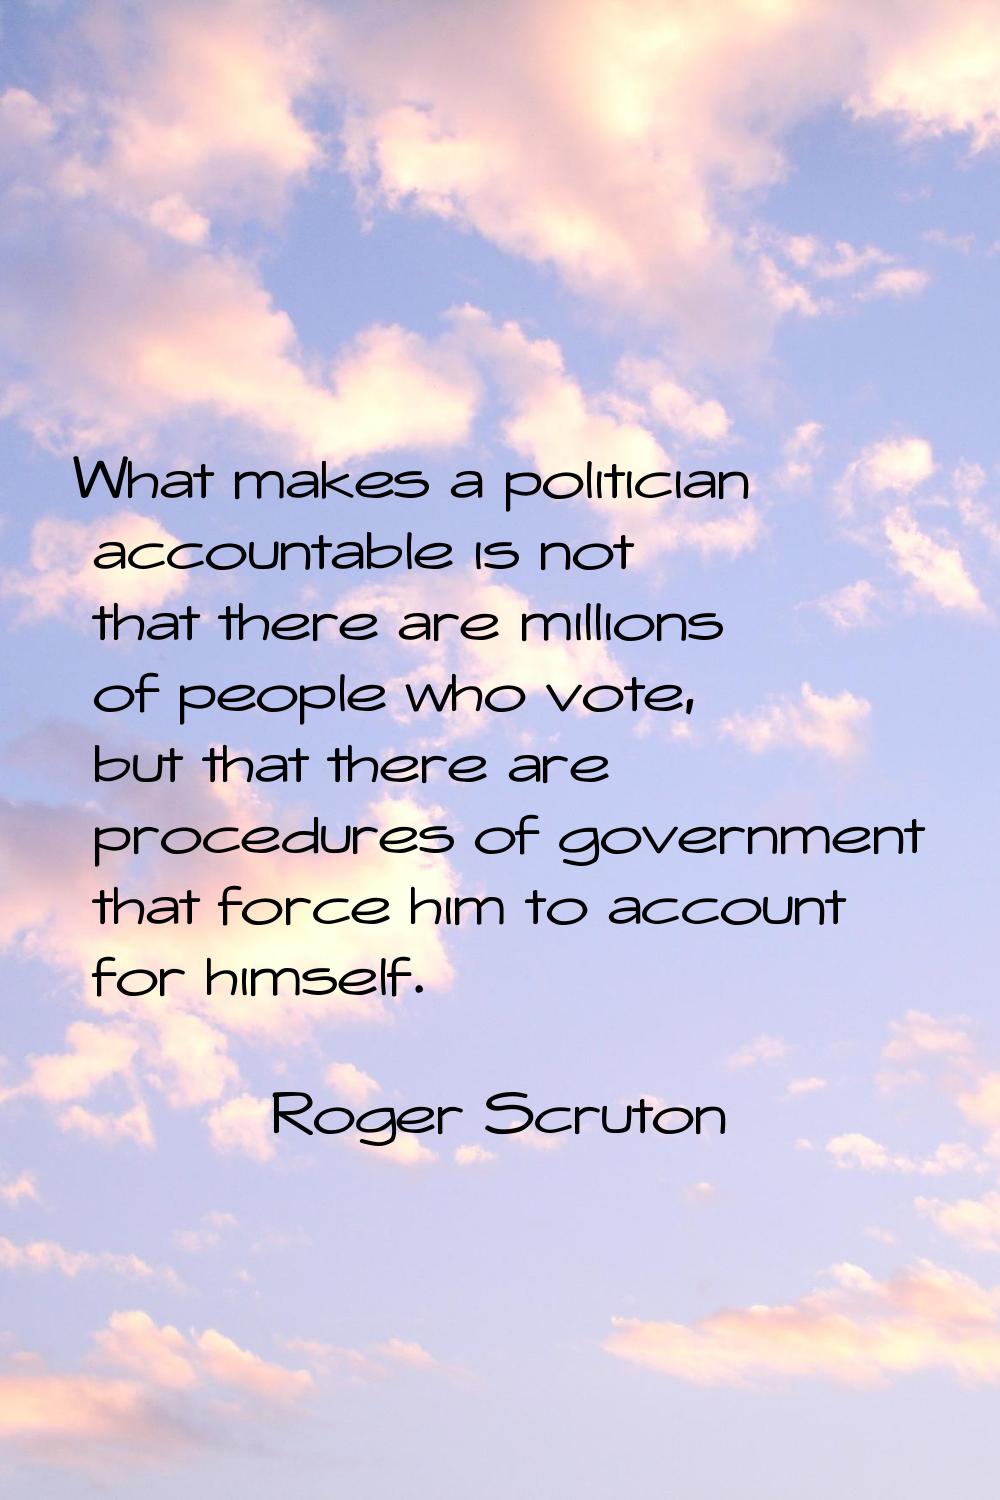 What makes a politician accountable is not that there are millions of people who vote, but that the